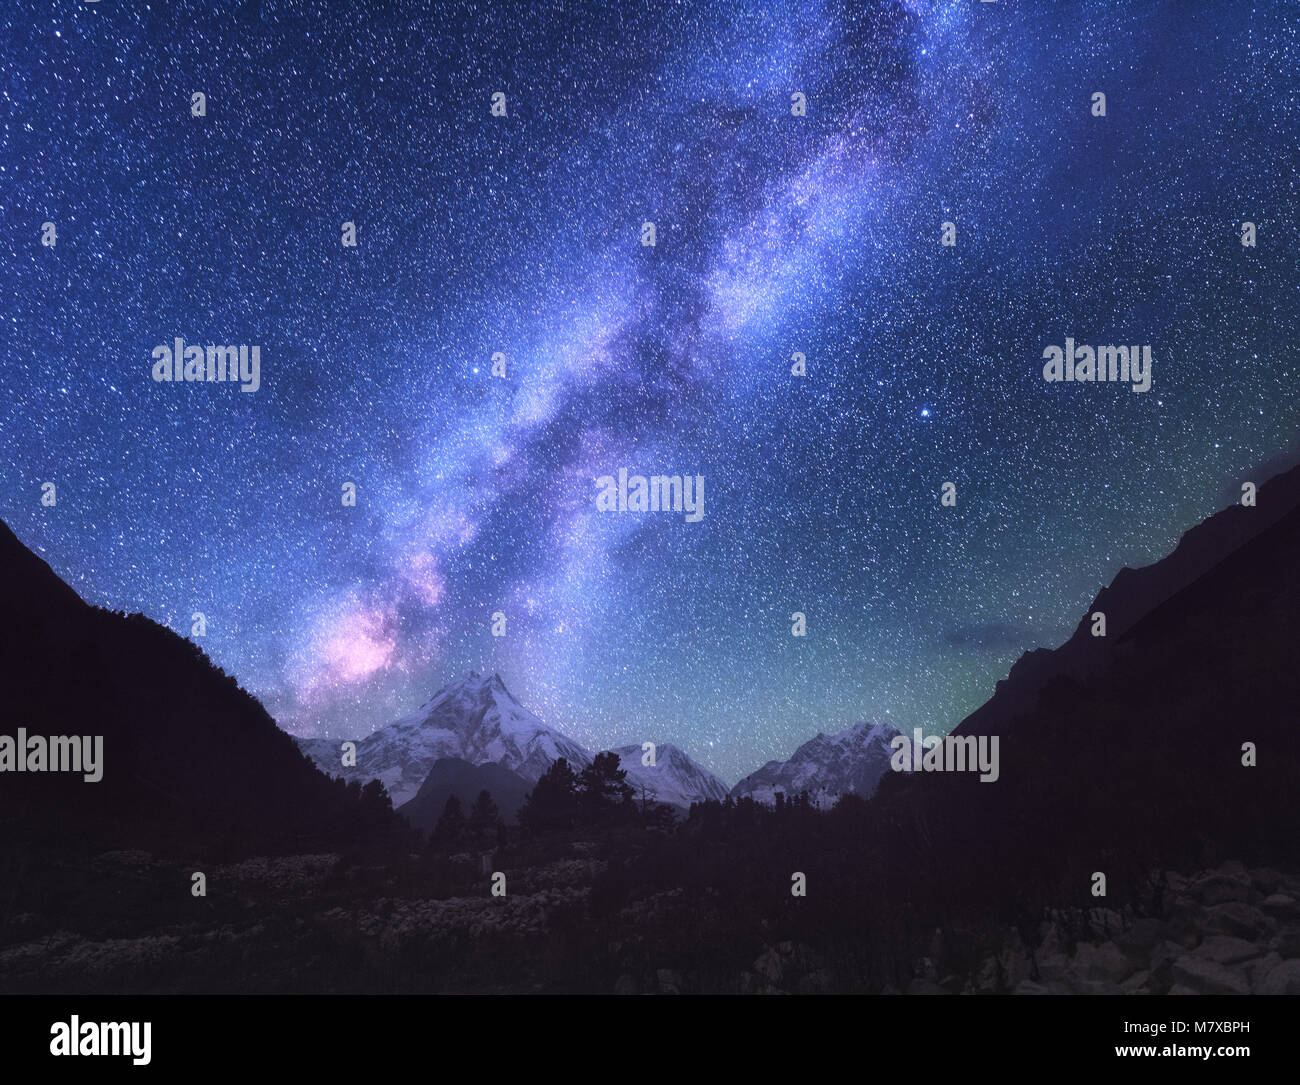 Space. Milky Way. Amazing scene with himalayan mountains and starry sky at night in Nepal. High rocks with snowy peak and sky with stars. Manaslu, Him Stock Photo